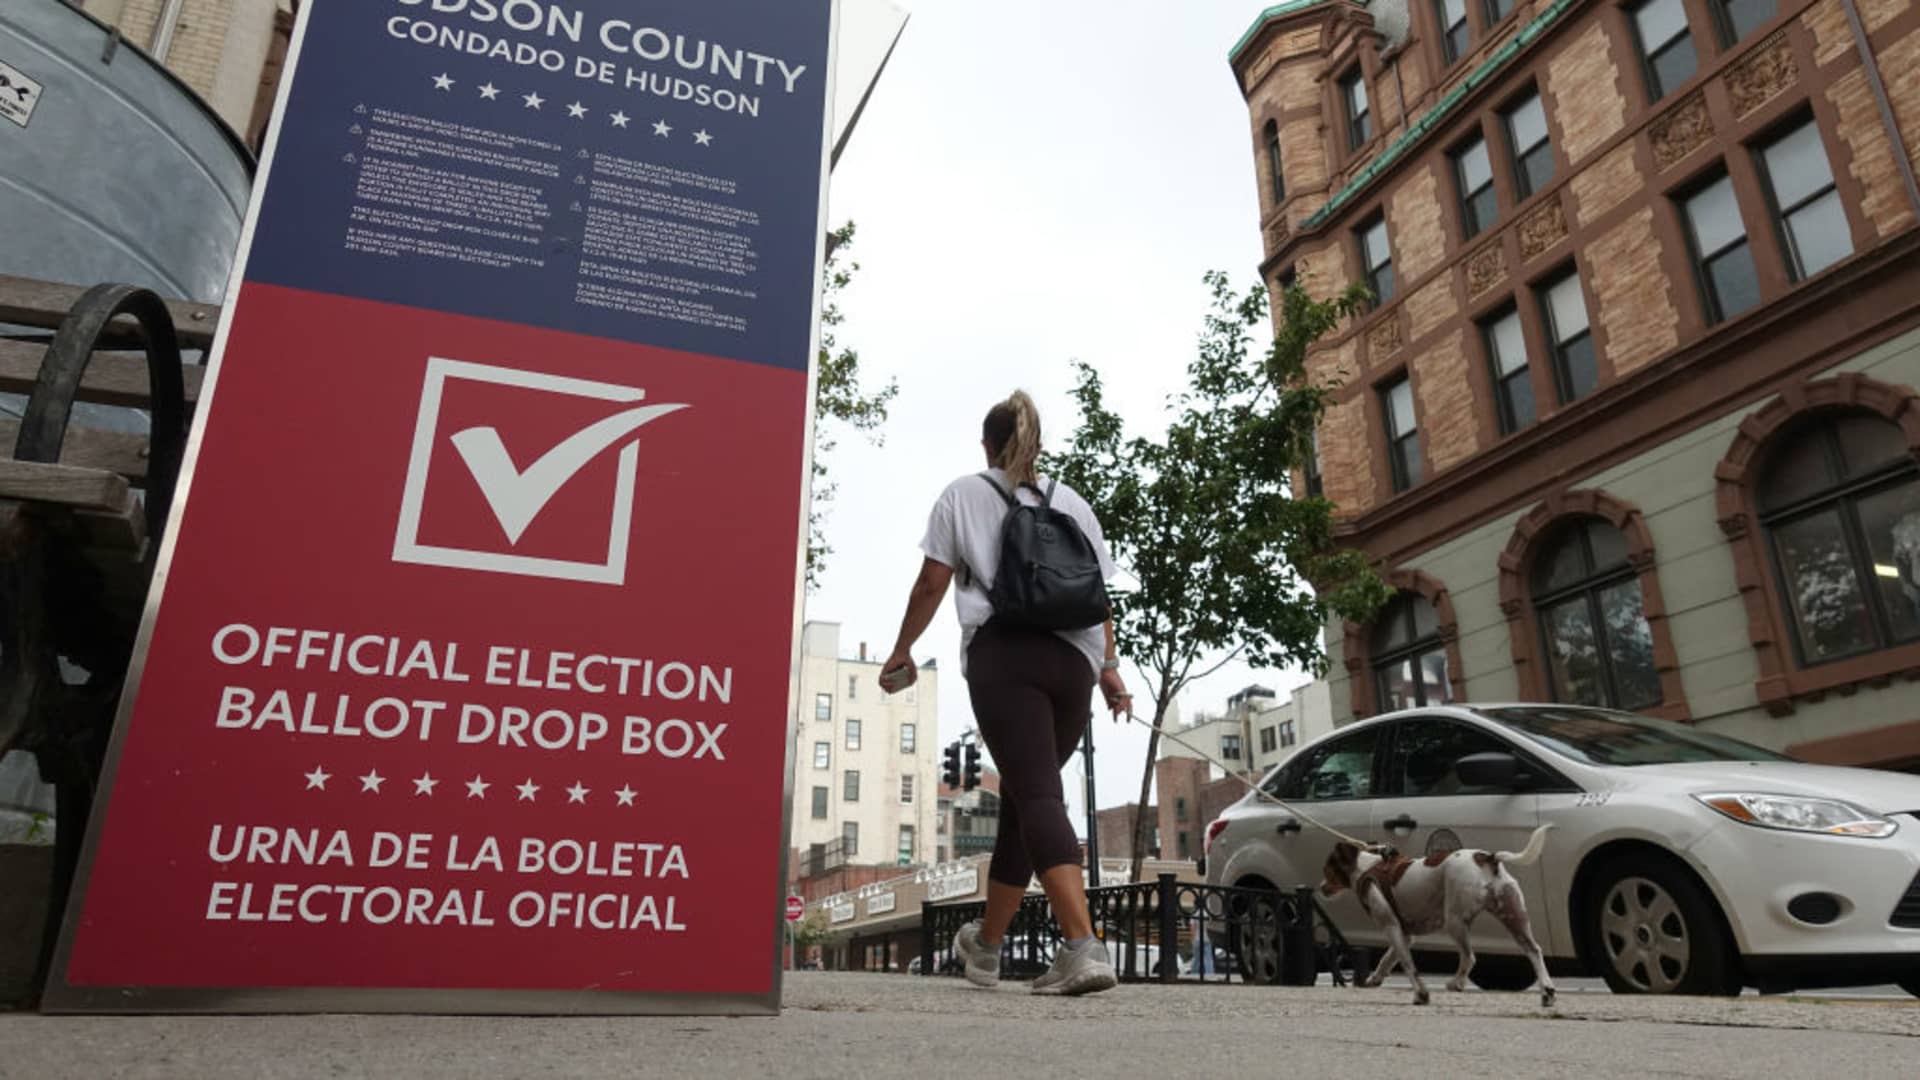 A Hudson County election ballot drop box sits outside City Hall on August 17, 2020 in Hoboken, NJ.